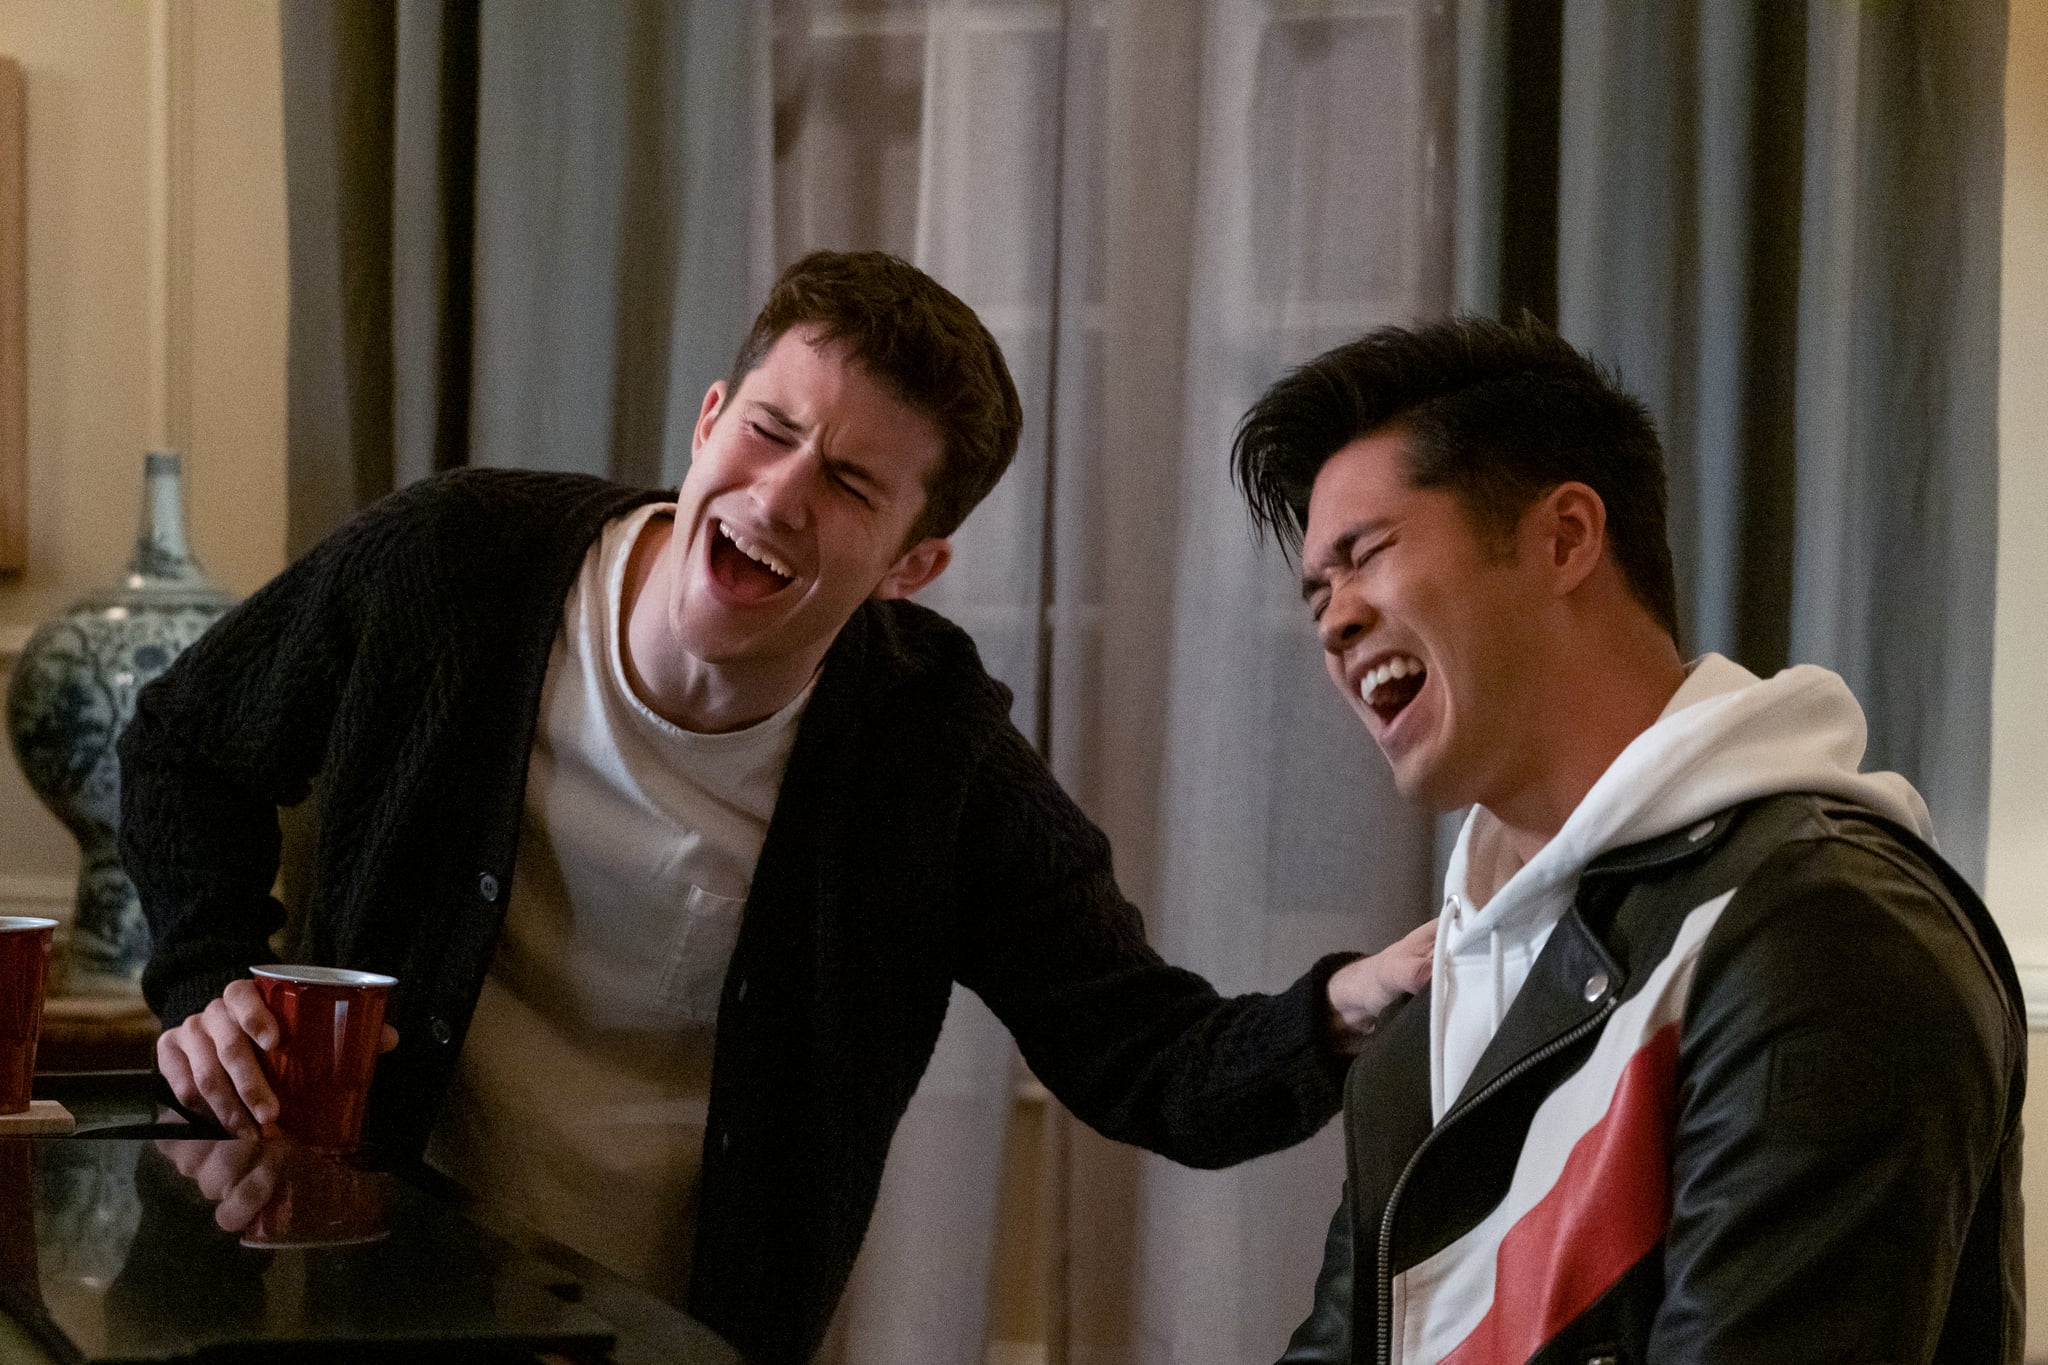 13 REASONS WHY  (L TO R) DYLAN MINNETTE as CLAY JENSEN and ROSS BUTLER as ZACH DEMPSEY in episode 405 of 13 REASONS WHY  Cr. DAVID MOIR/NETFLIX  2020